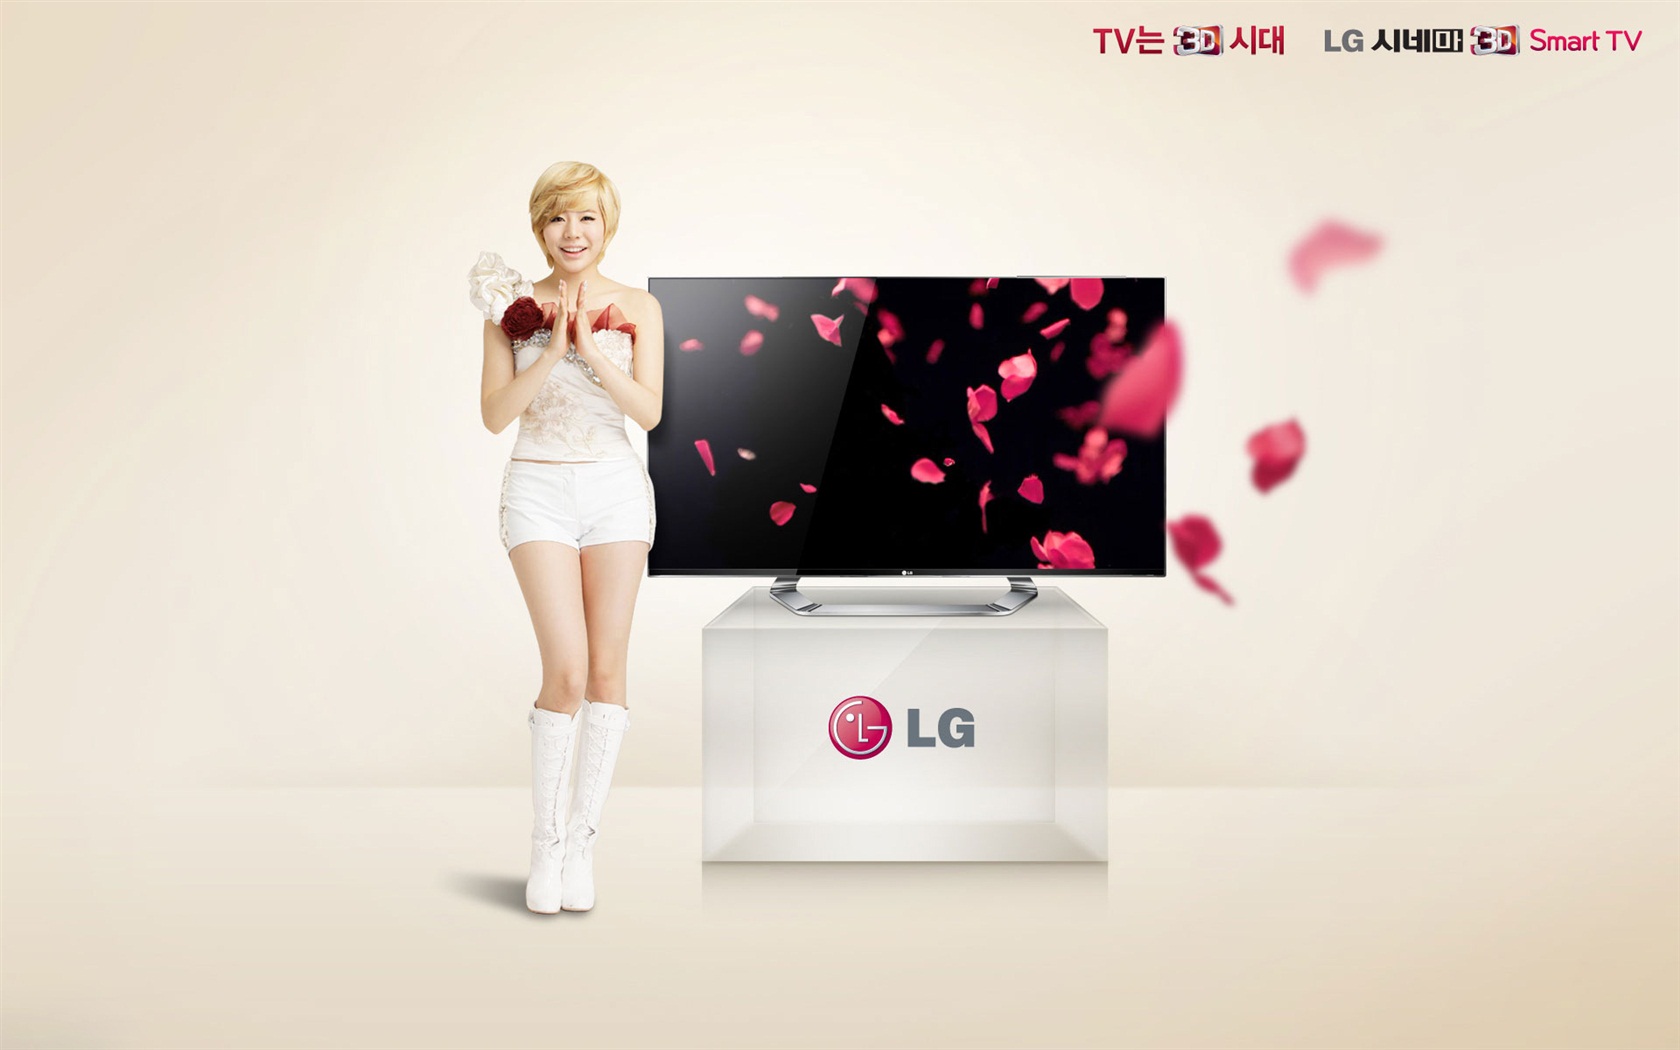 Girls Generation ACE and LG endorsements ads HD wallpapers #19 - 1680x1050